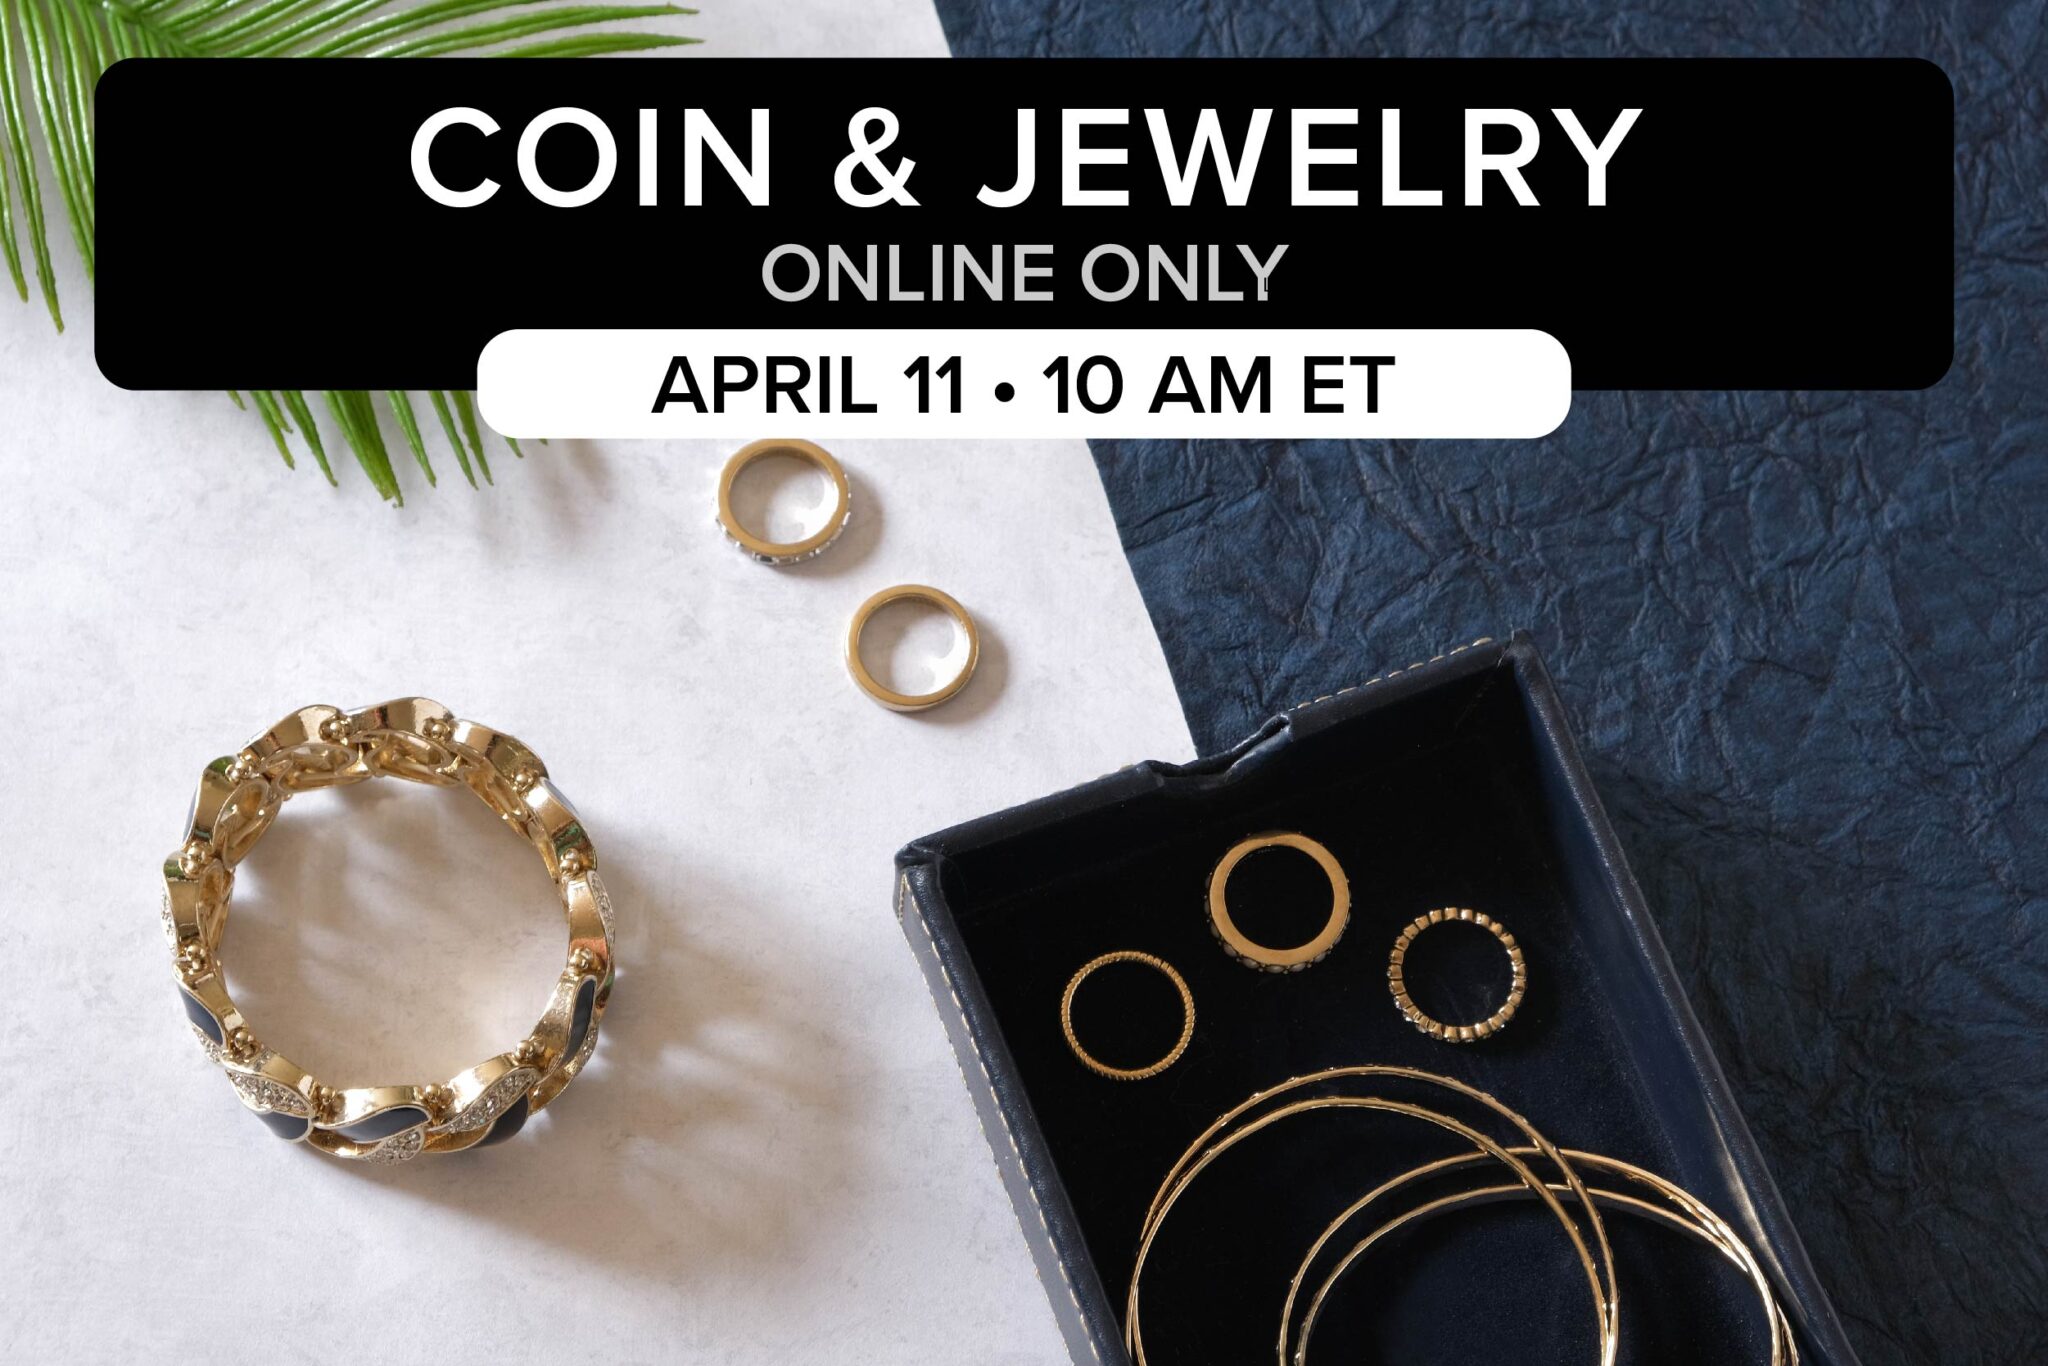 Coin & jewelry-01